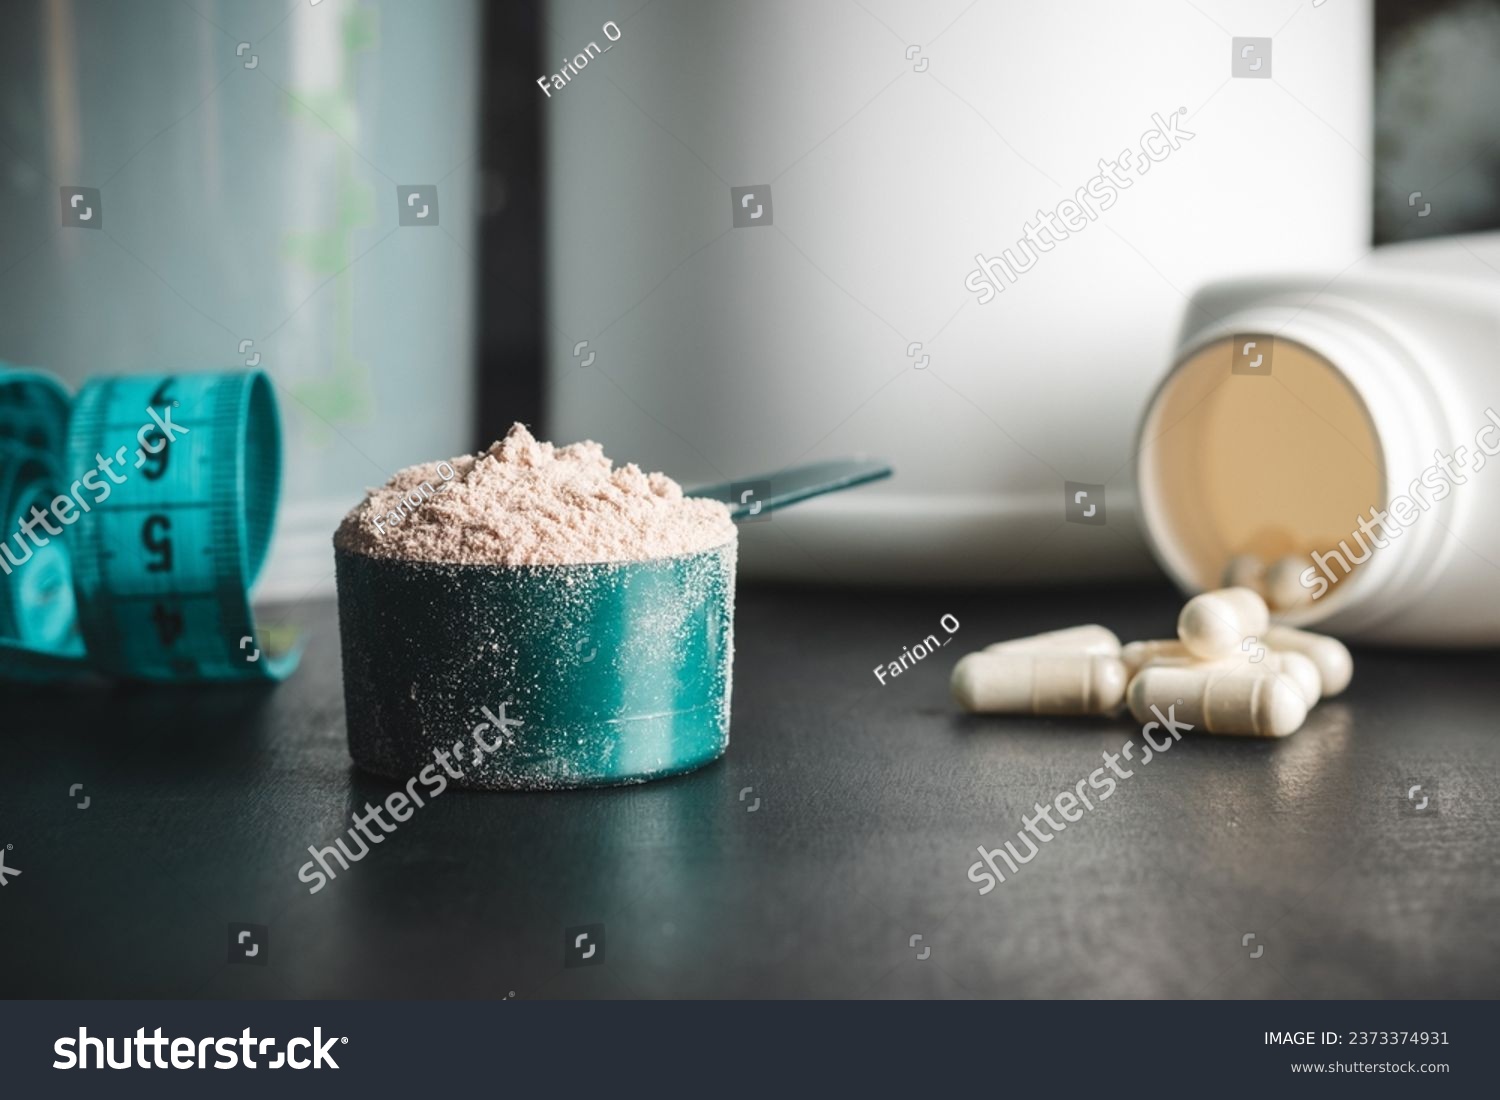 Chocolate whey protein powder in measuring spoon, white capsules of amino acids, vitamins and creatine, measuring tape, plastic shaker on dark background. bodybuilding food supplements. #2373374931